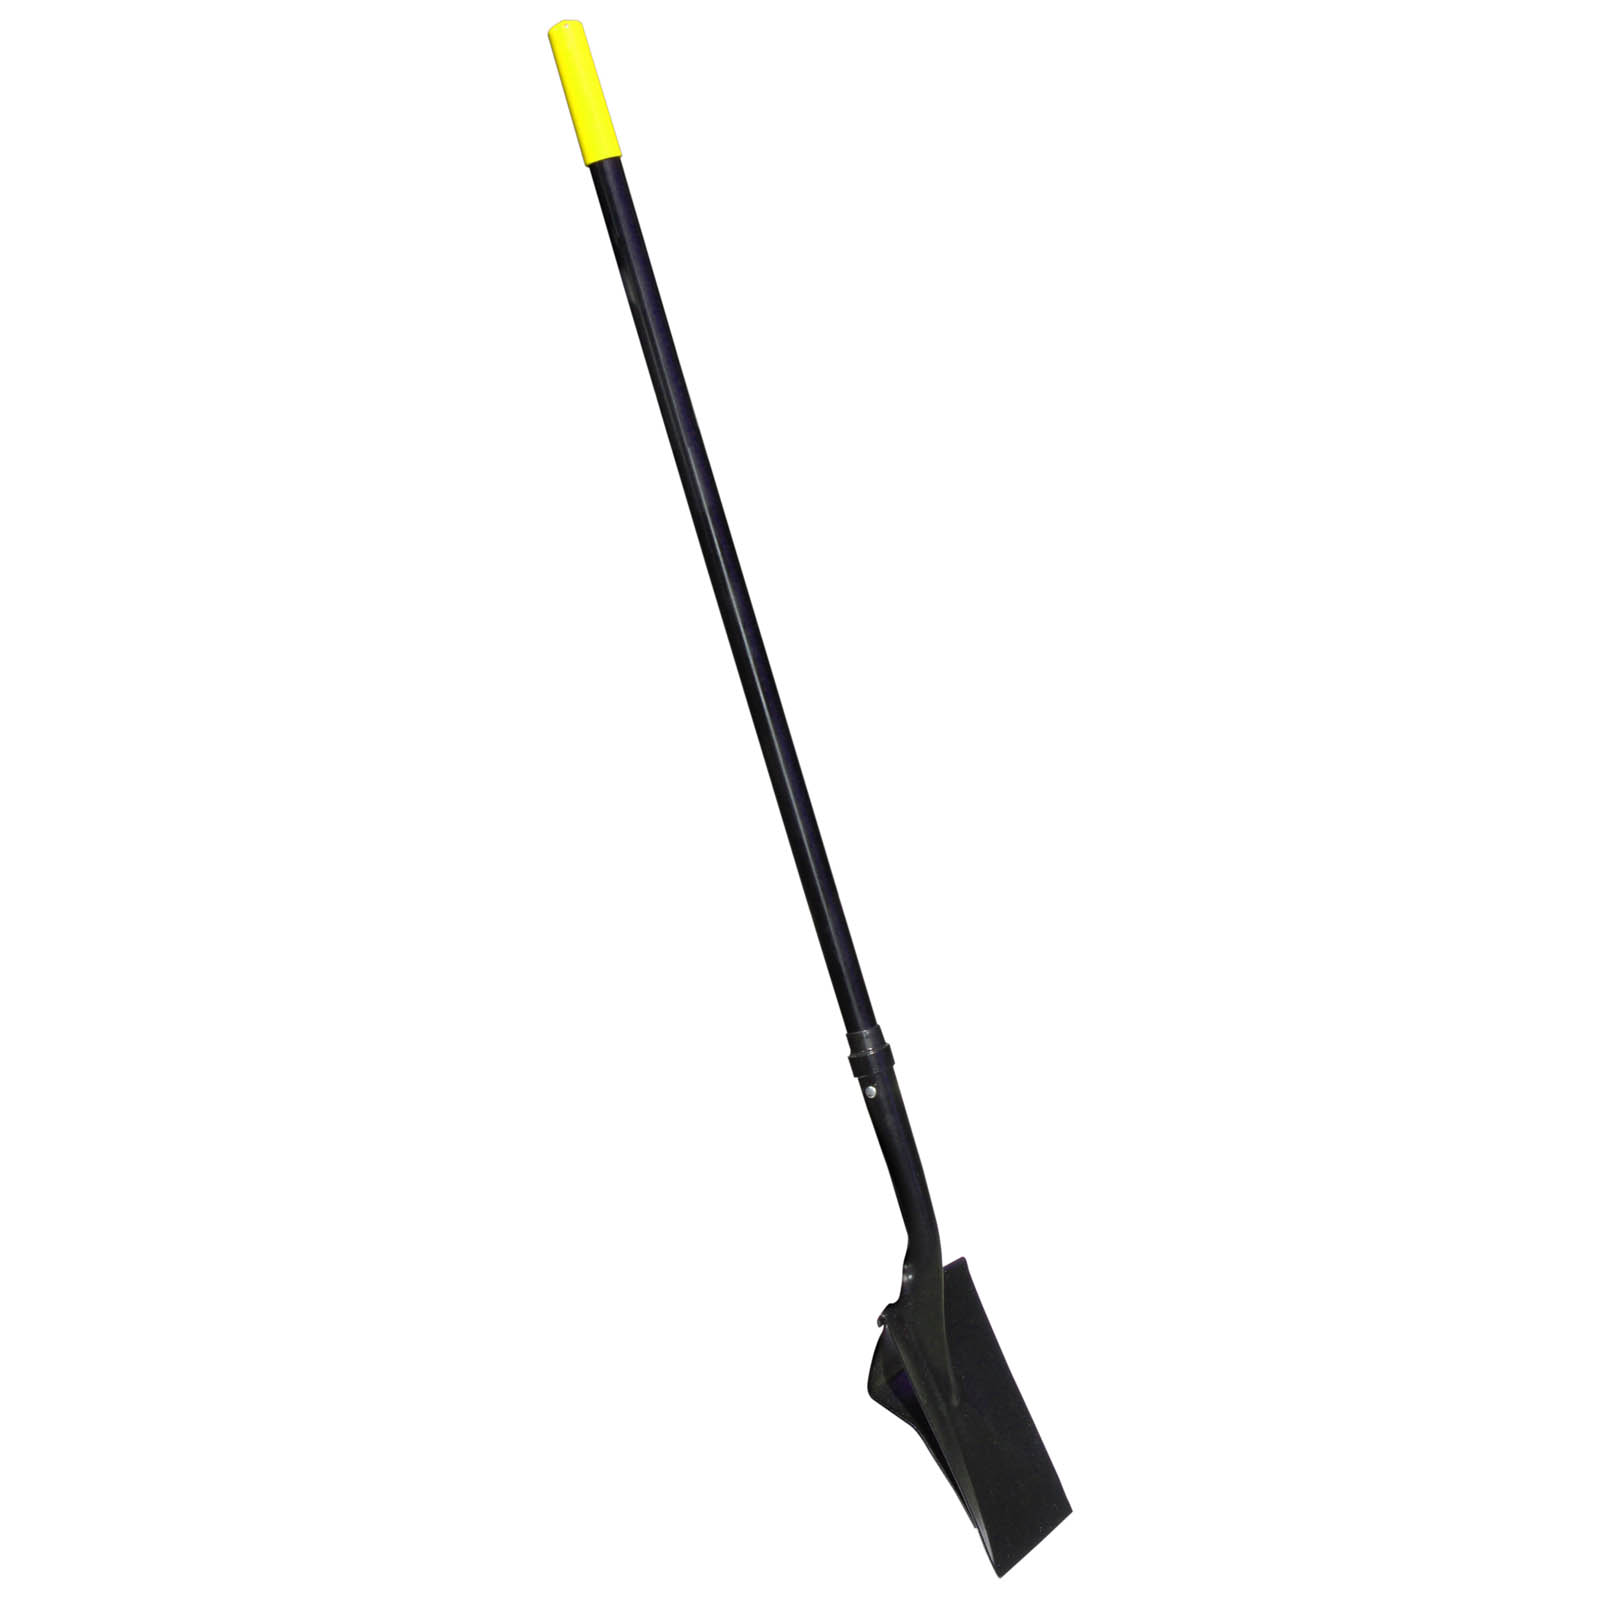 Product Roofers Spade with Fiberglass Handle